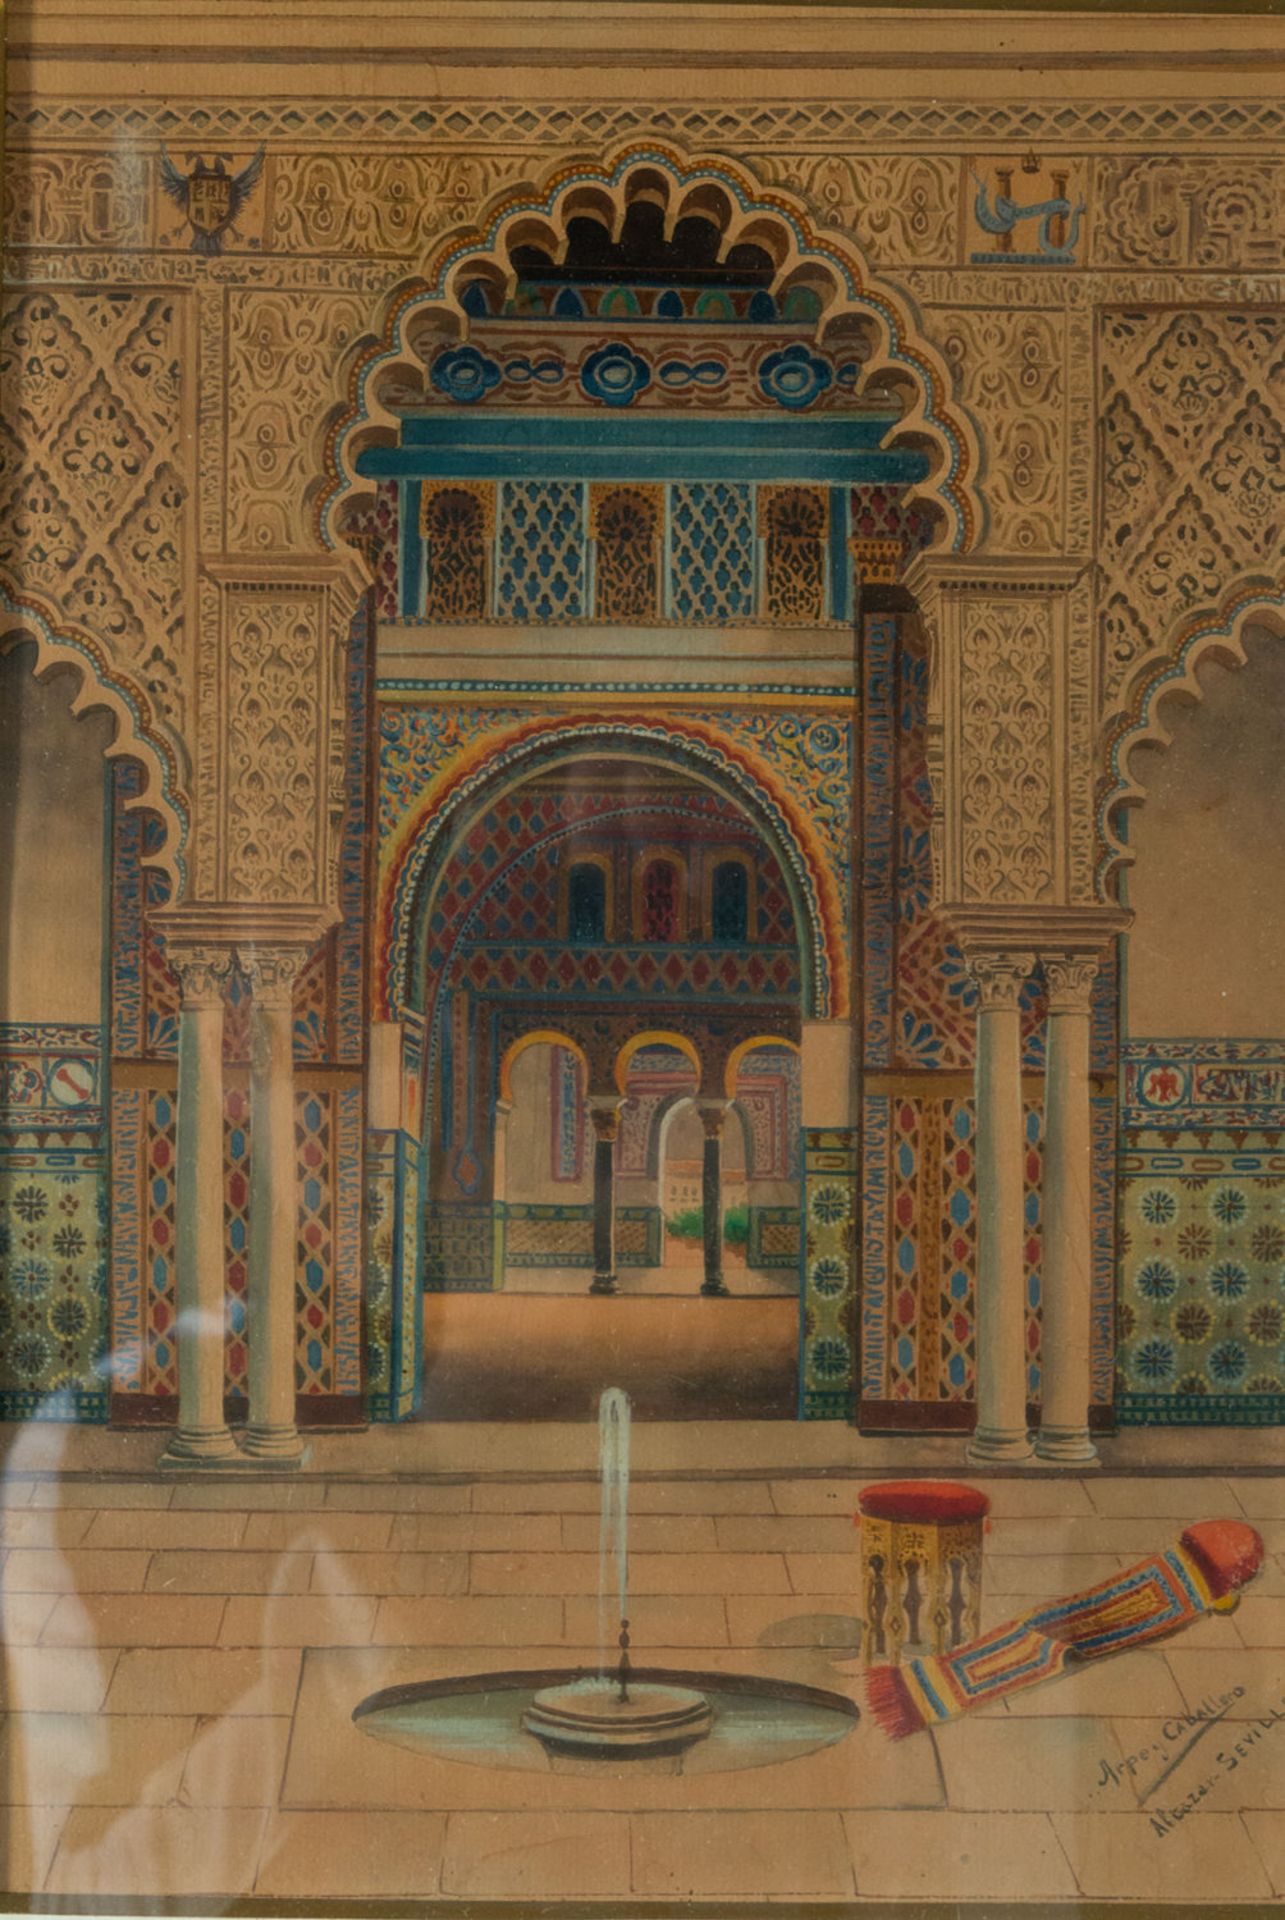 Courtyard of the Alc‡zar of Seville, Arpey Caballero, Spanish school of the 19th - 20th century - Image 5 of 6